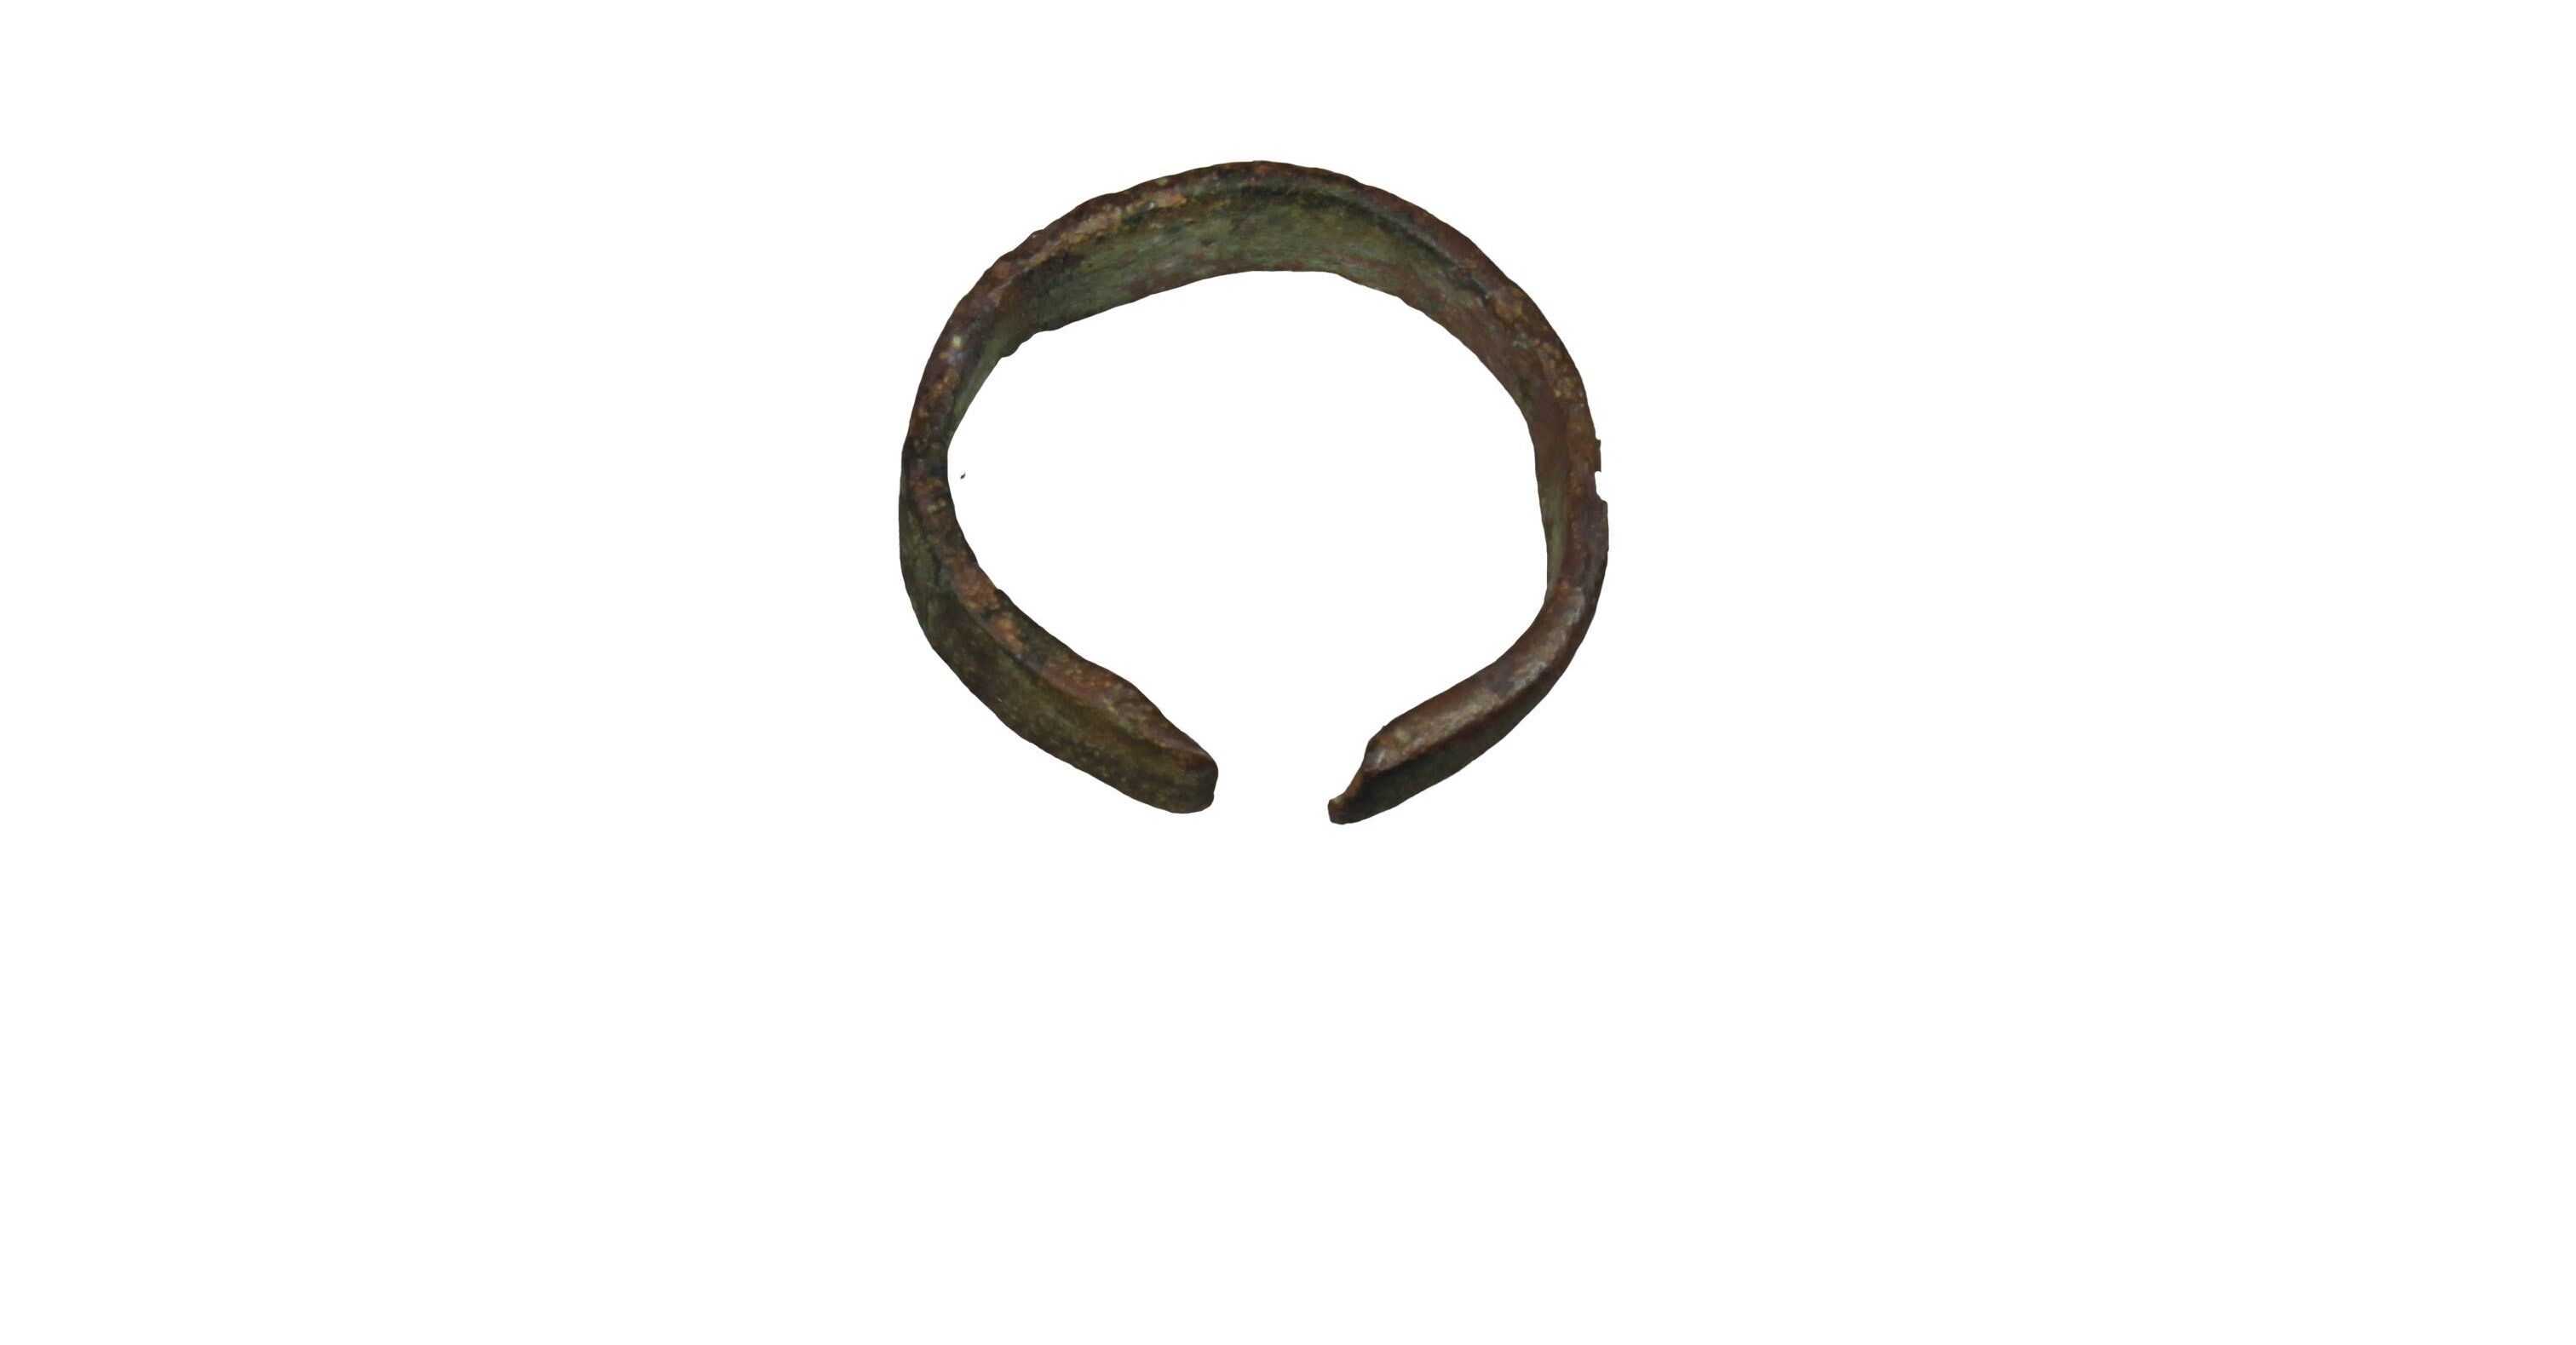 Photograph of a brass ring